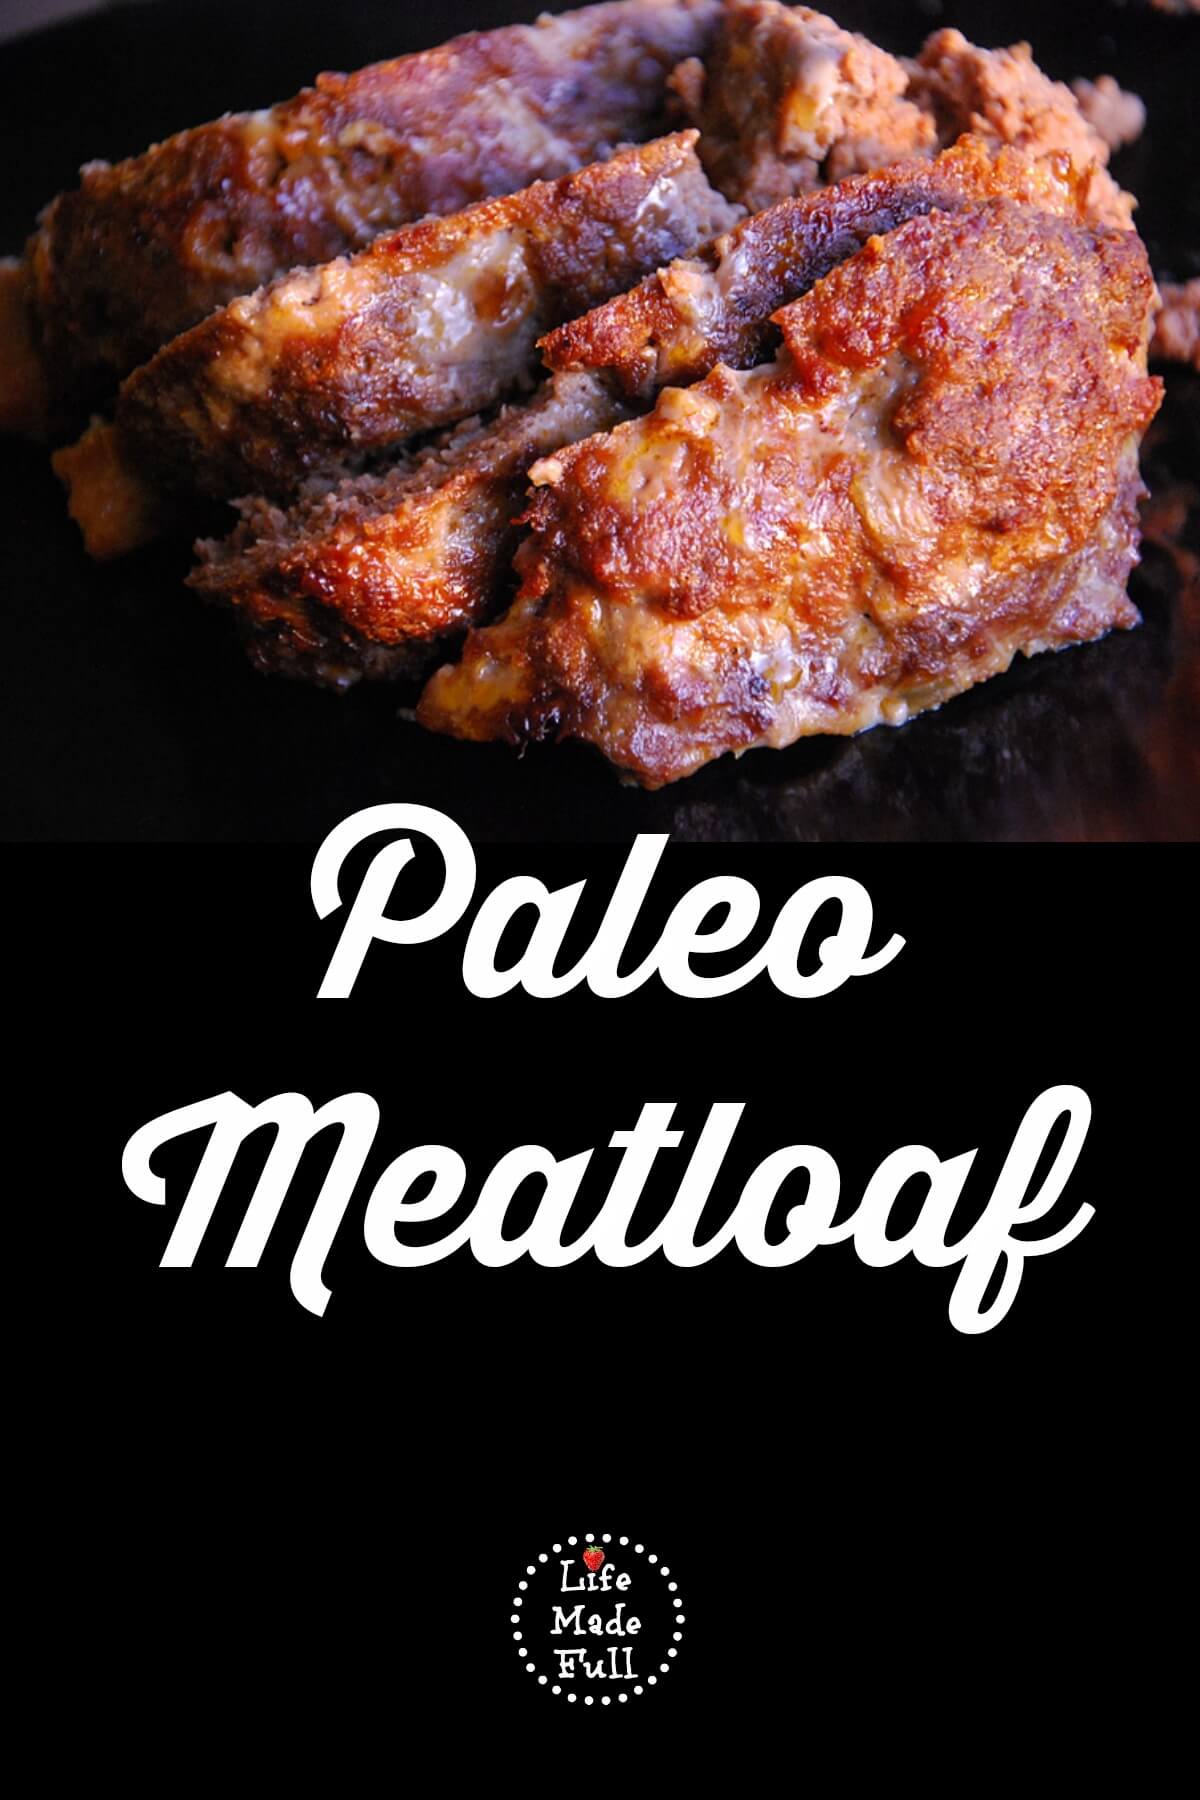 Paleo Meatloaf (Whole30-friendly) - Life Made Full